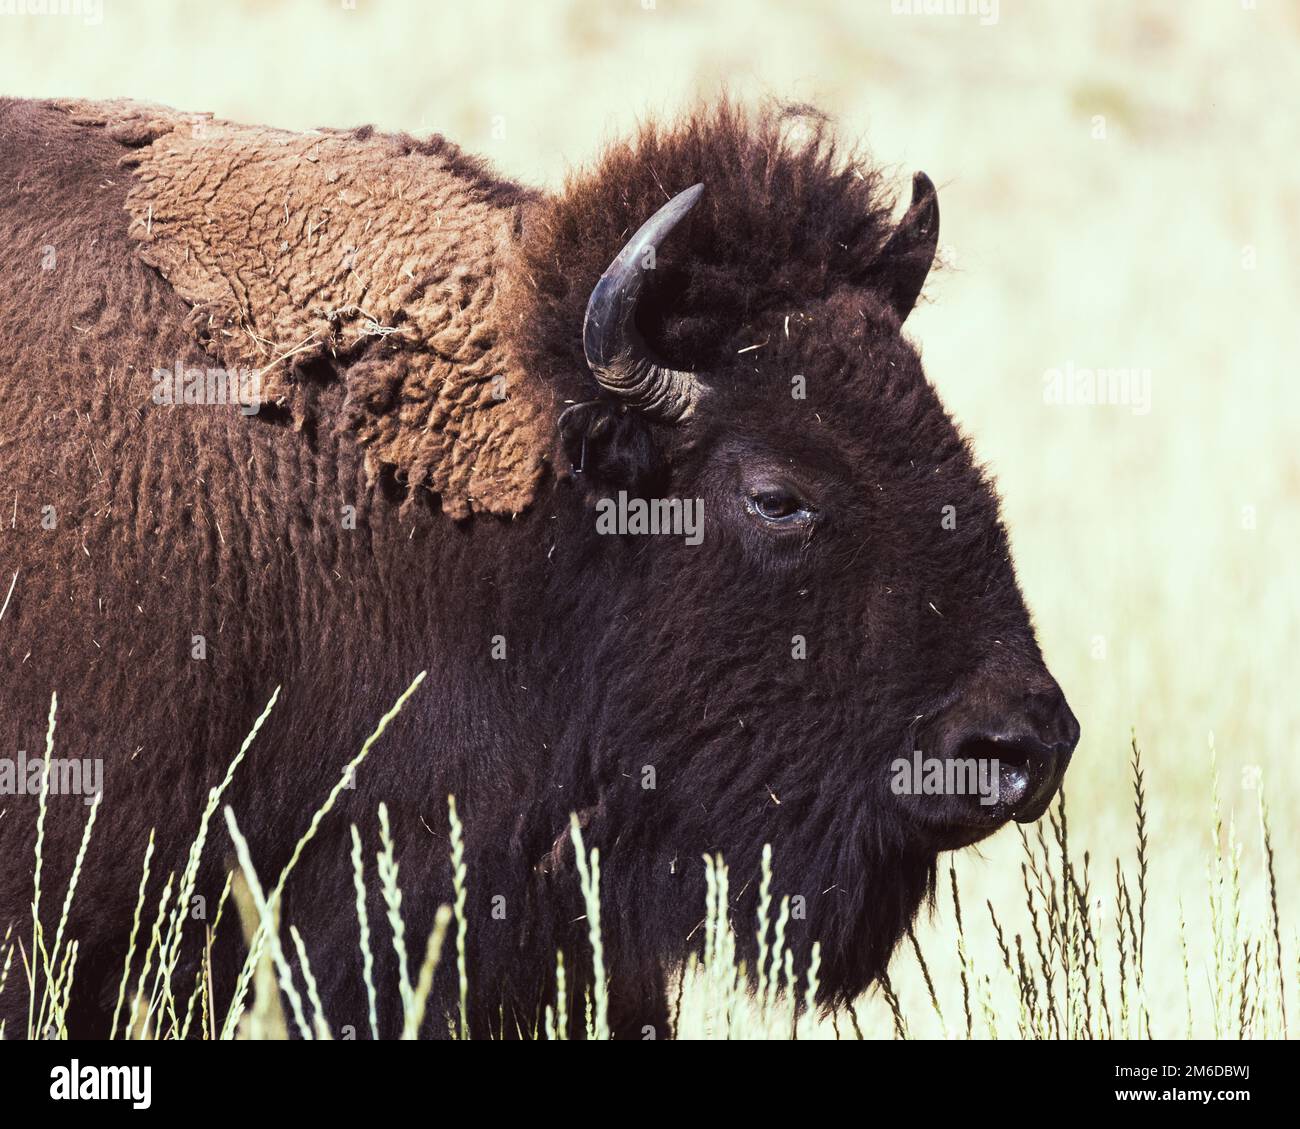 Wild American Bison, also called Buffalo, in a conservation program on Antelope Island, Utah, United States. Stock Photo